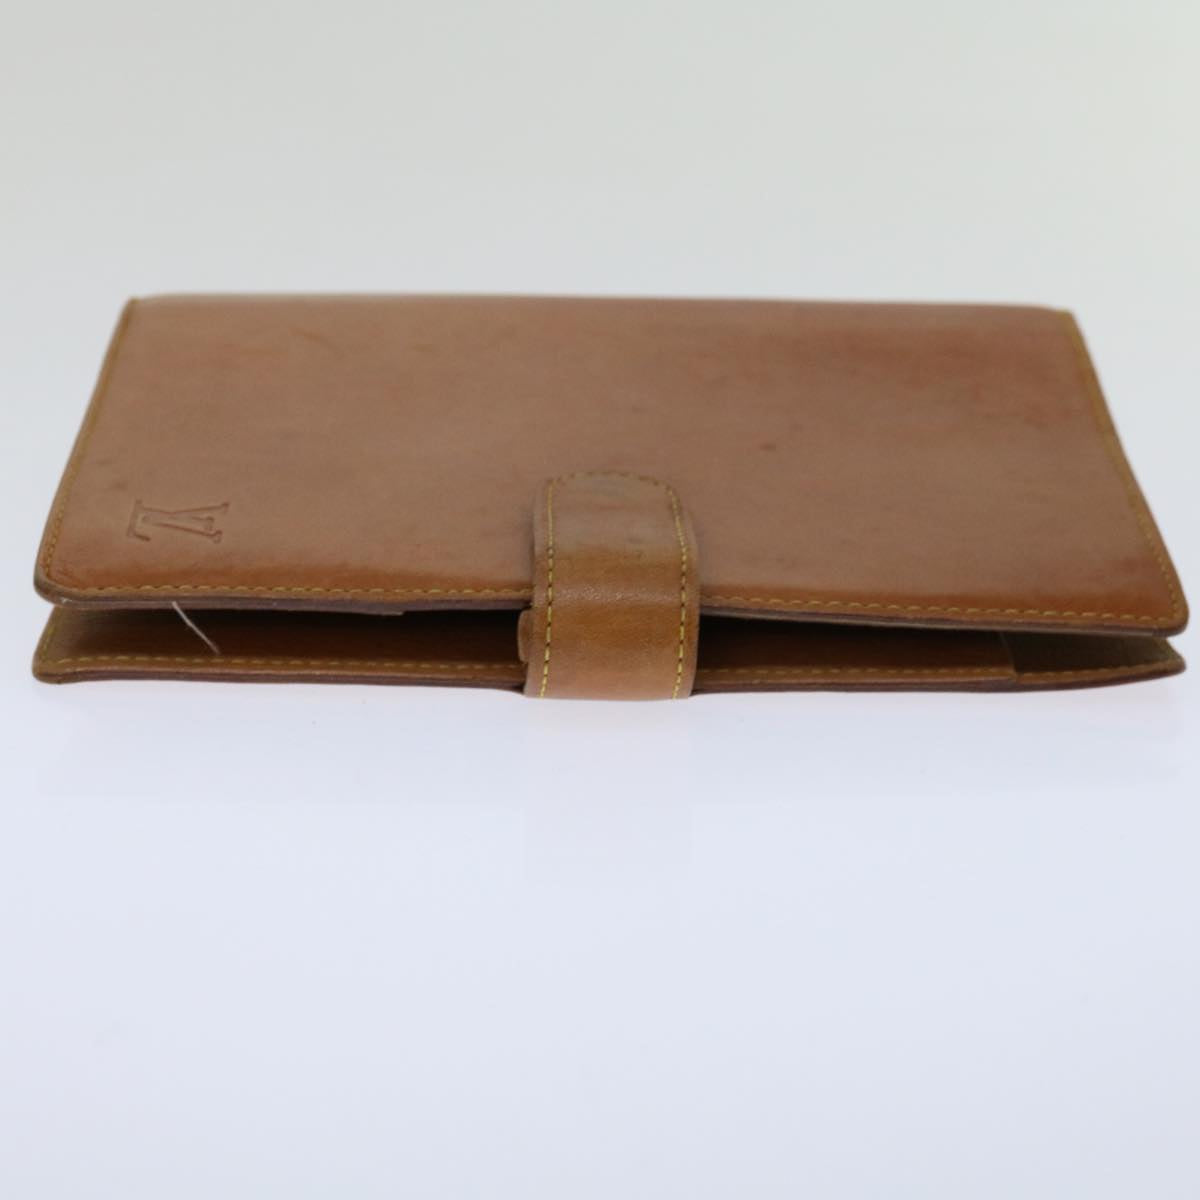 LOUIS VUITTON Nomad Leather Agenda MM Day Planner Cover Beige R20473 Auth 69494